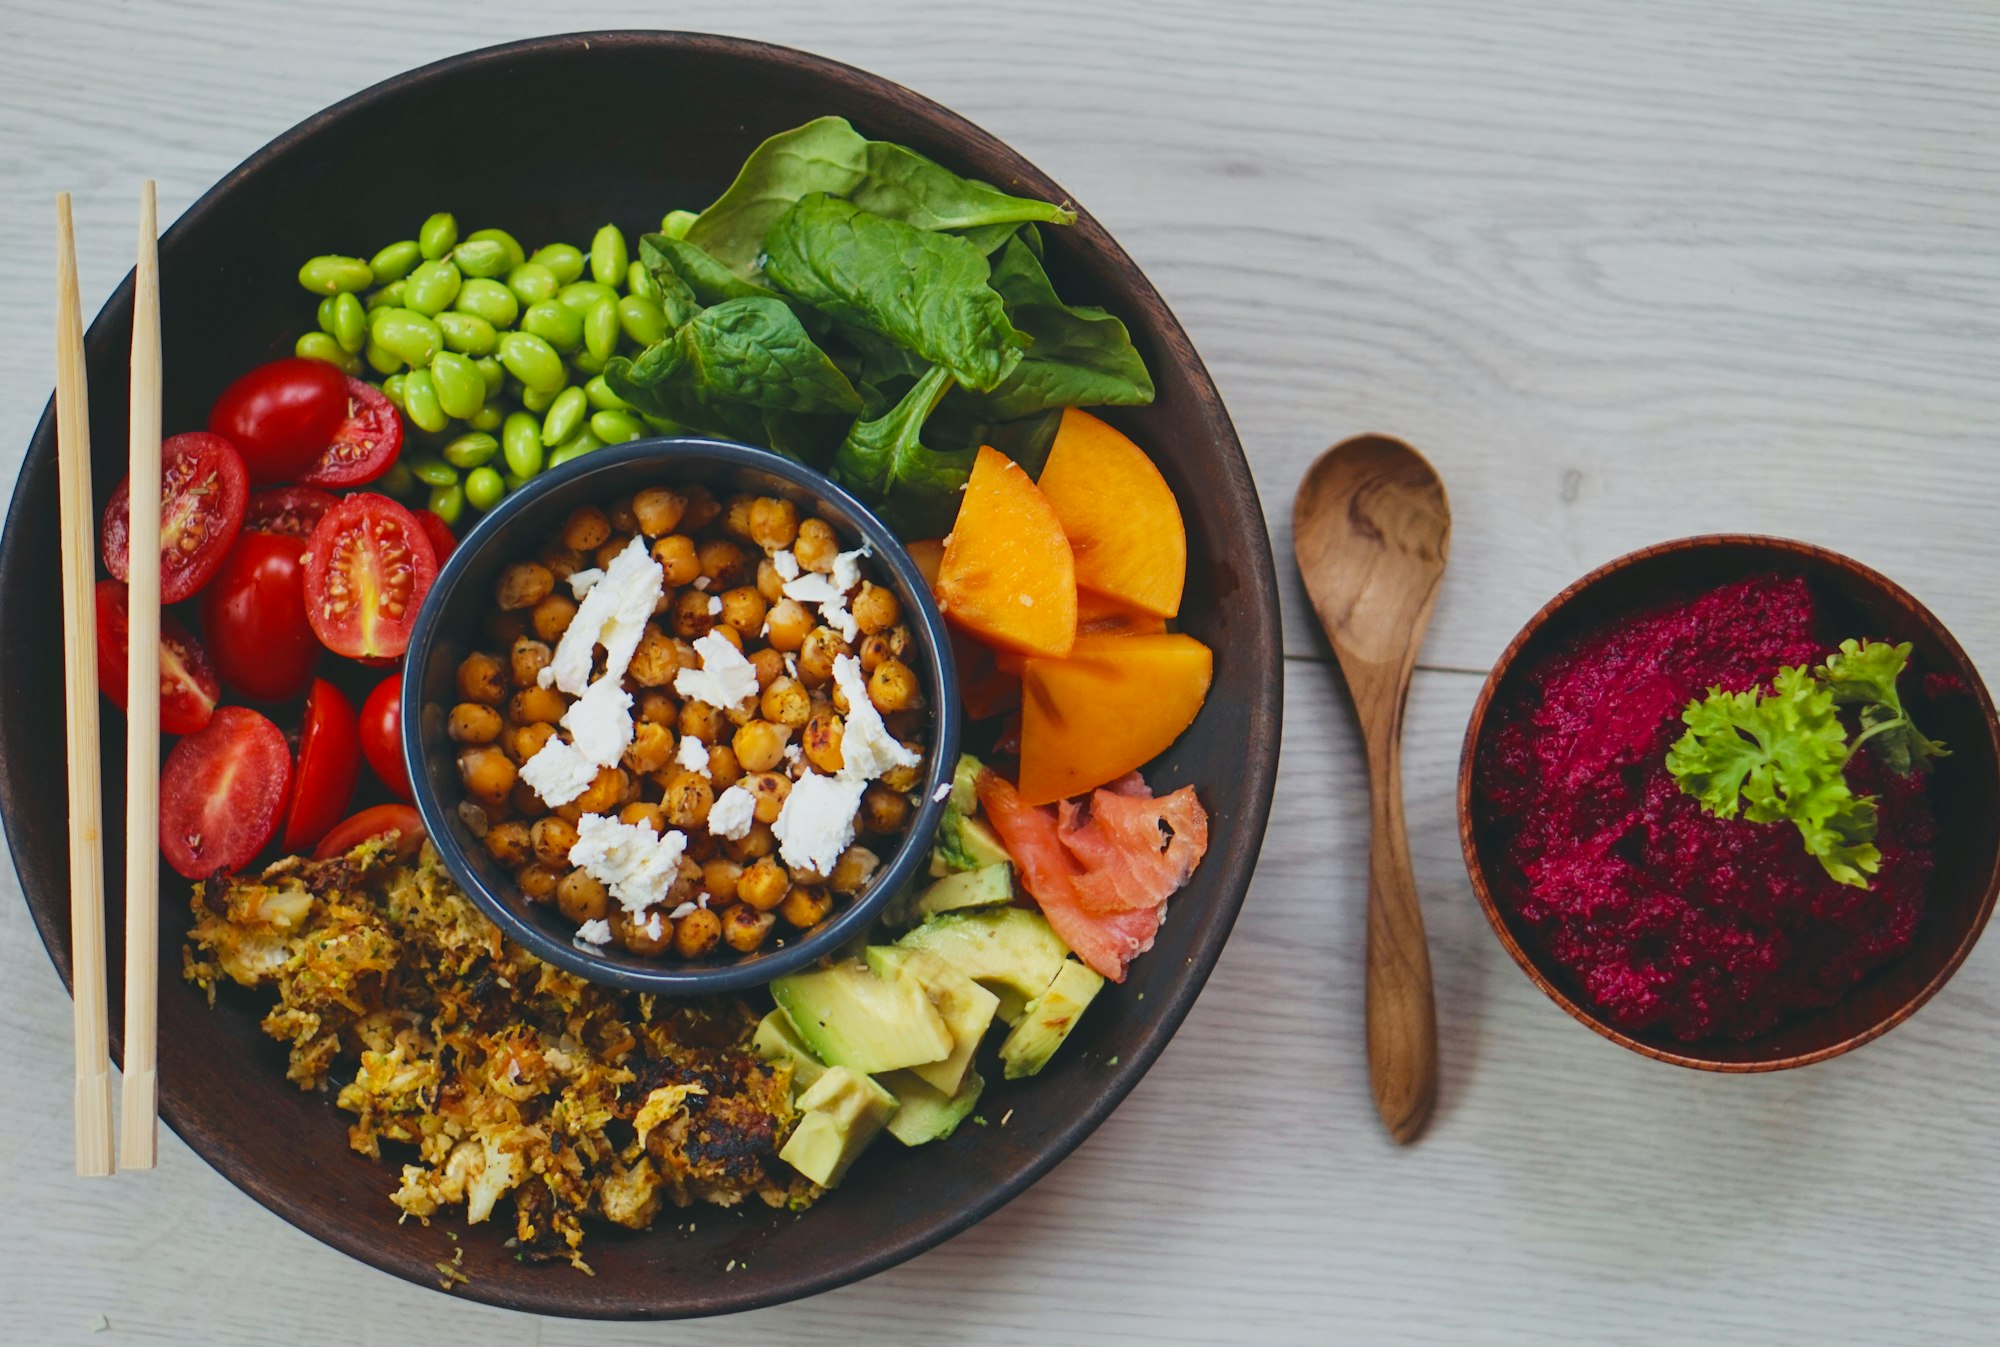 Heal your gut with the 30-foods challenge by Charlotte Karlsen for Unsplash.